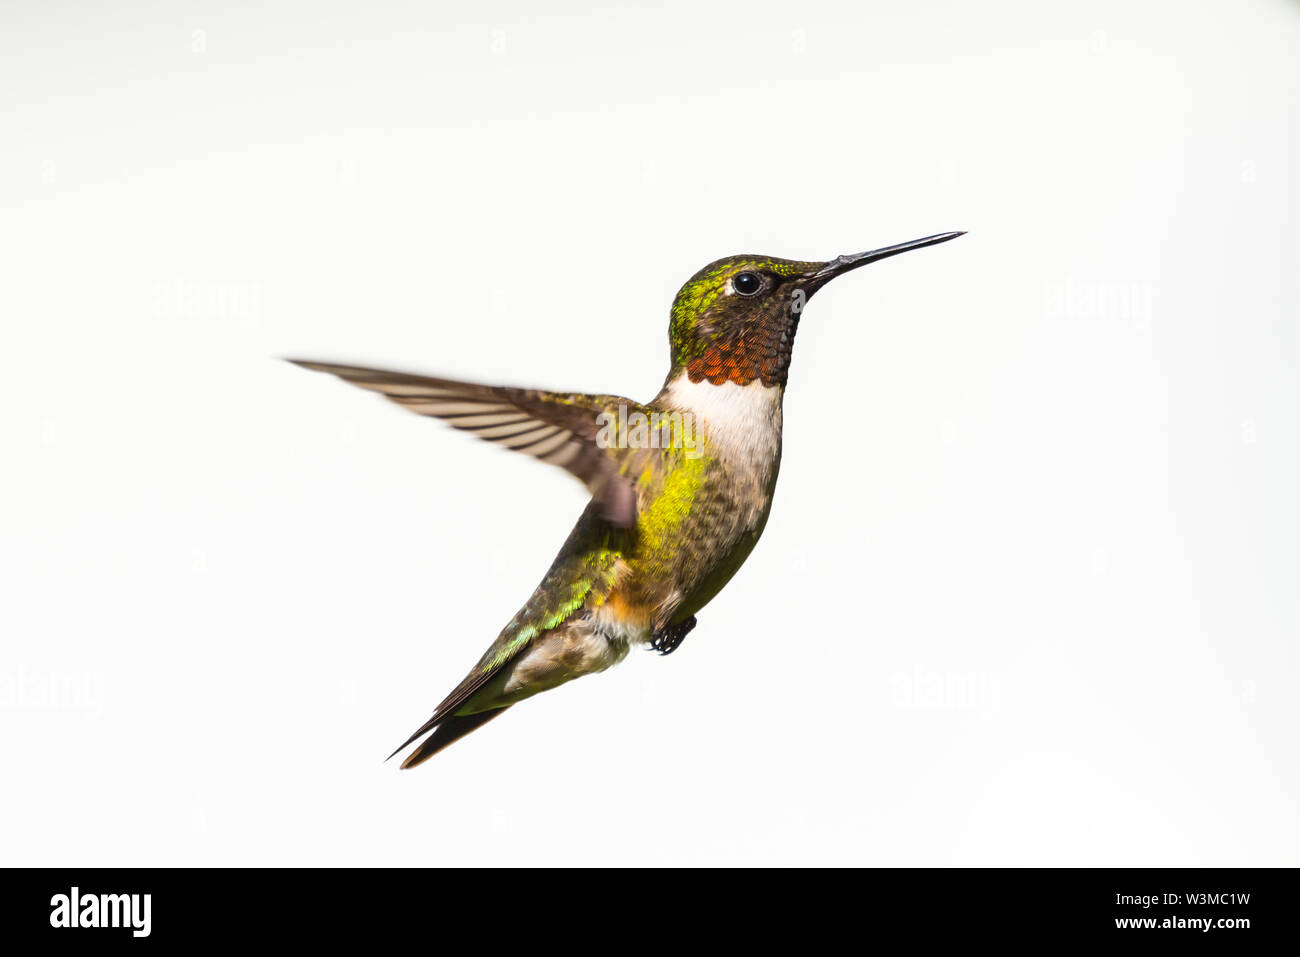 Closeup of a male Ruby-Throated Hummingbird flying on a white background Stock Photo